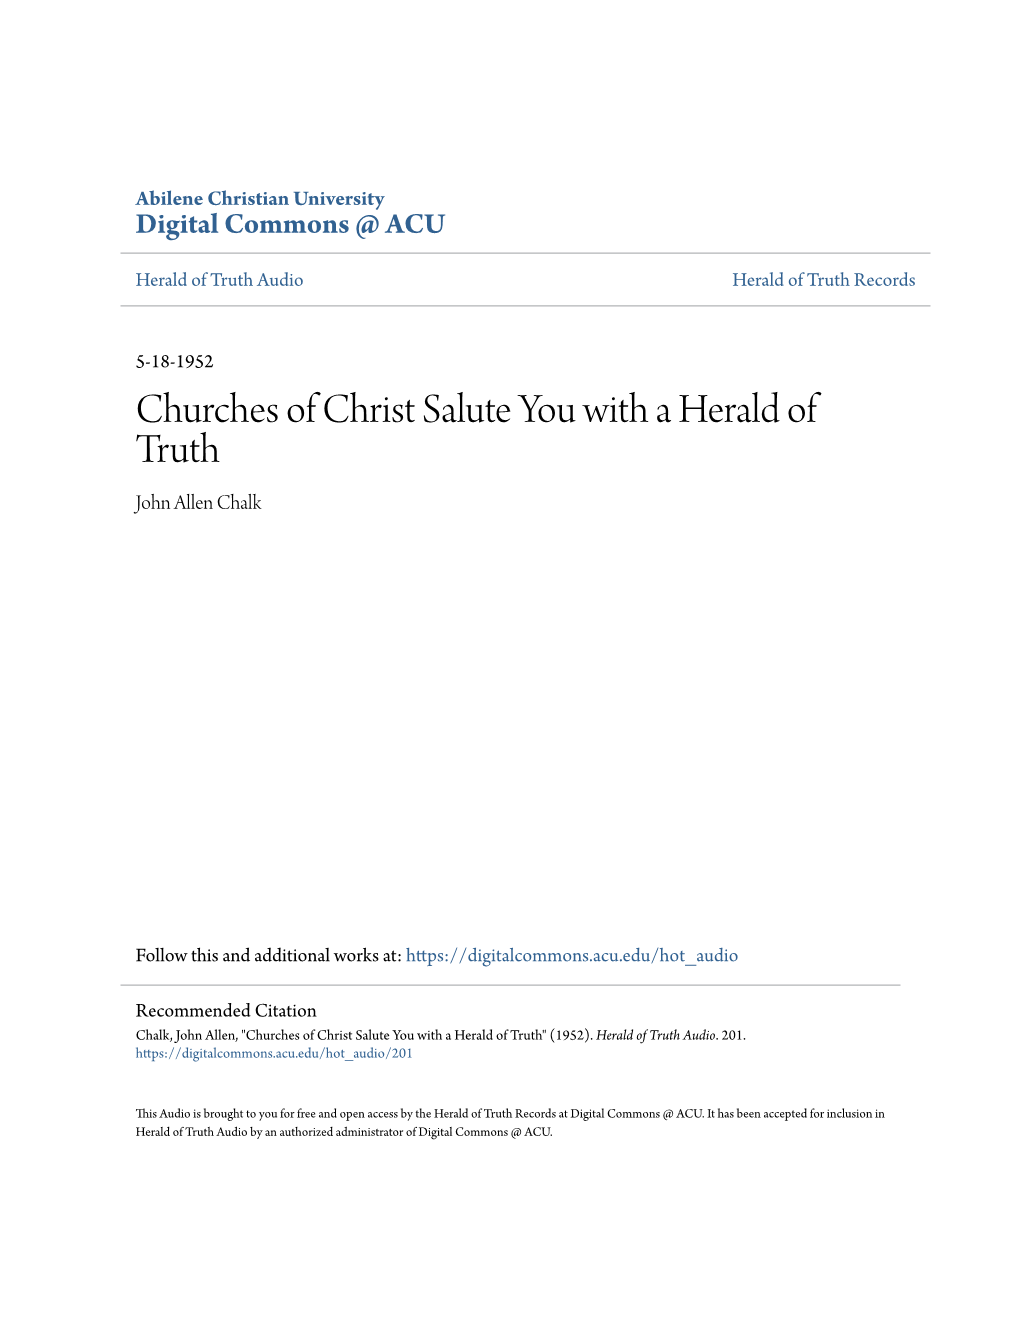 Churches of Christ Salute You with a Herald of Truth John Allen Chalk